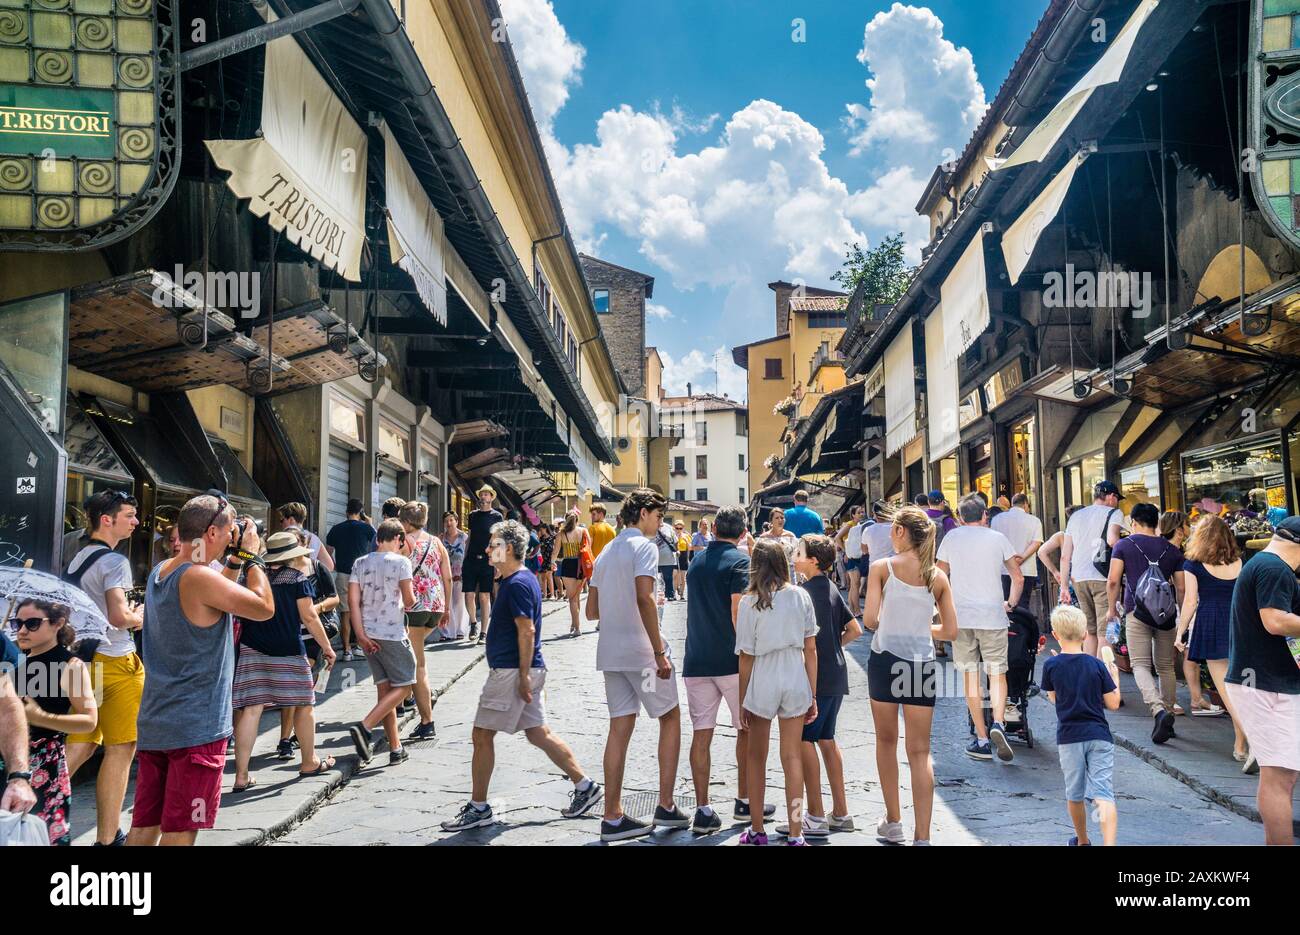 the Ponte Vecchio medieval stone arch bridge across the river Arno in Florence is lined  by the shops of jewelers, art dealers, and souvenir sellers, Stock Photo